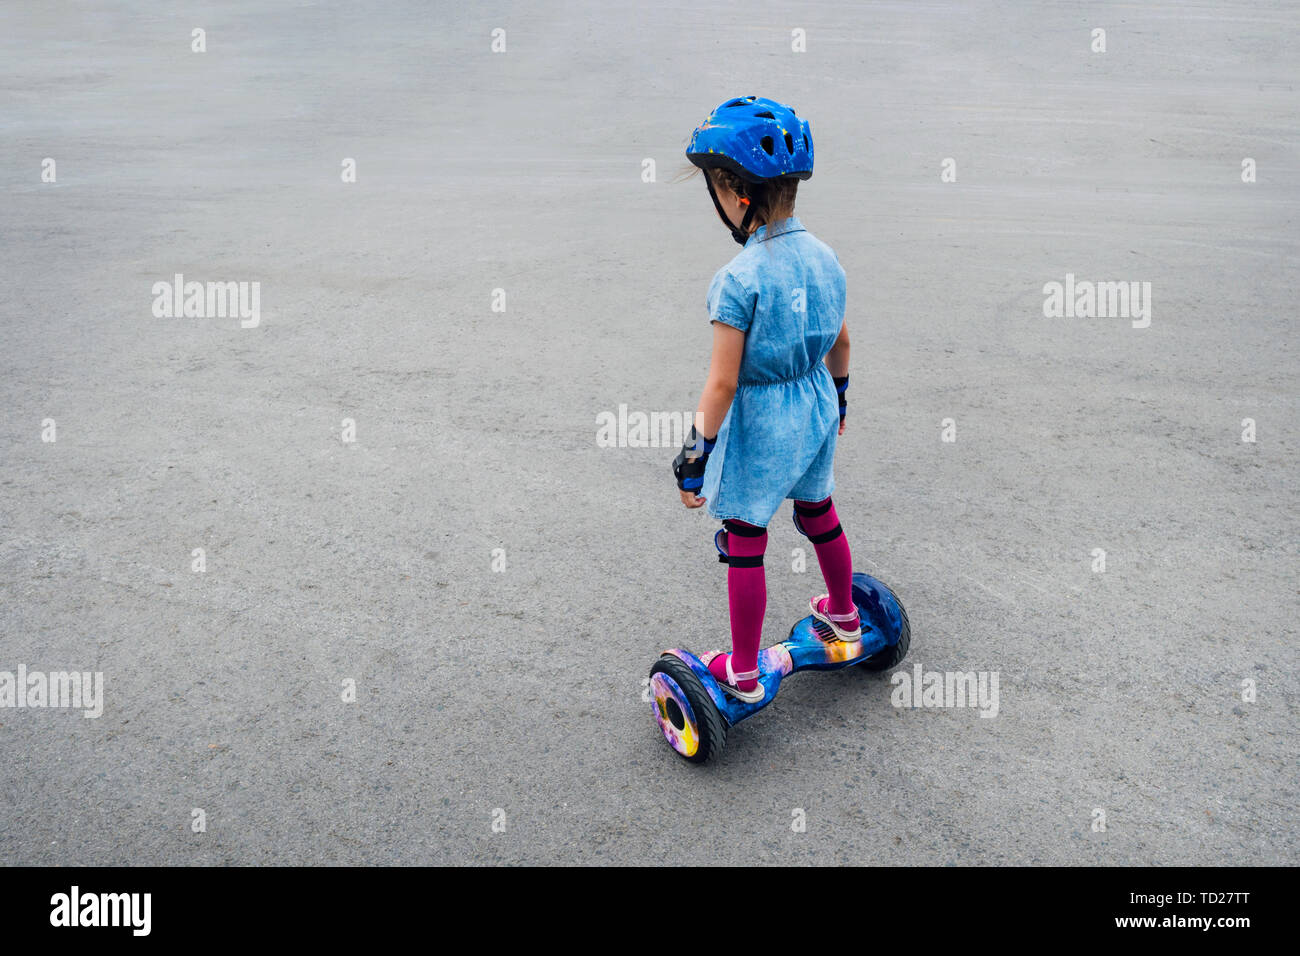 Happy girl riding on gyroscooter outdoors. Active life concept. Child rides on hover board in protective gear helmet knee pads elbow pads. Dangerous Stock Photo